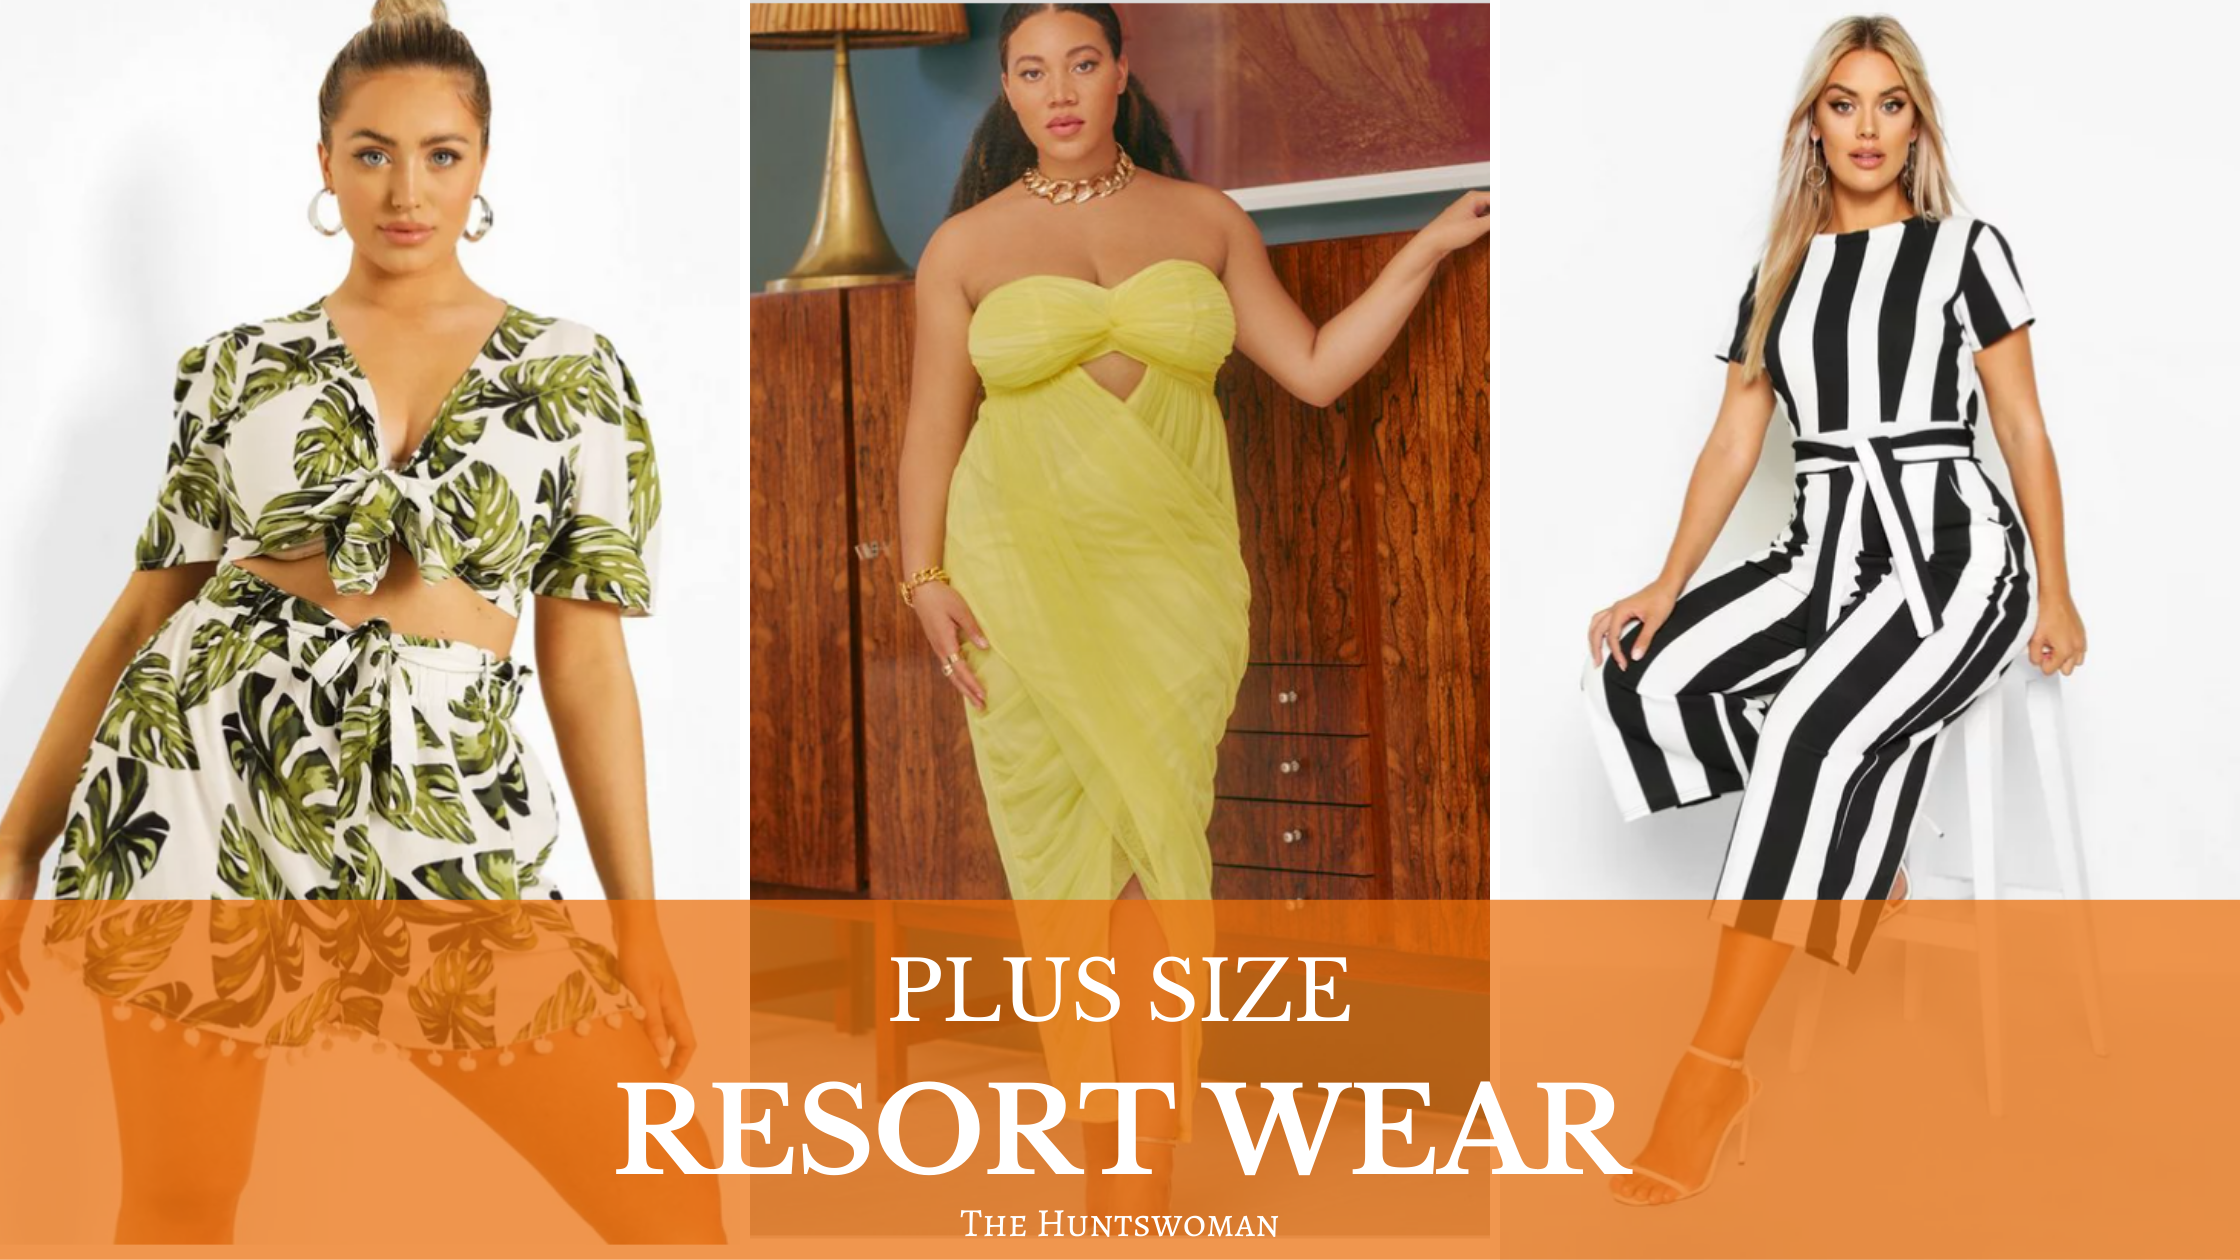 Where to Shop for Resort - The Huntswoman